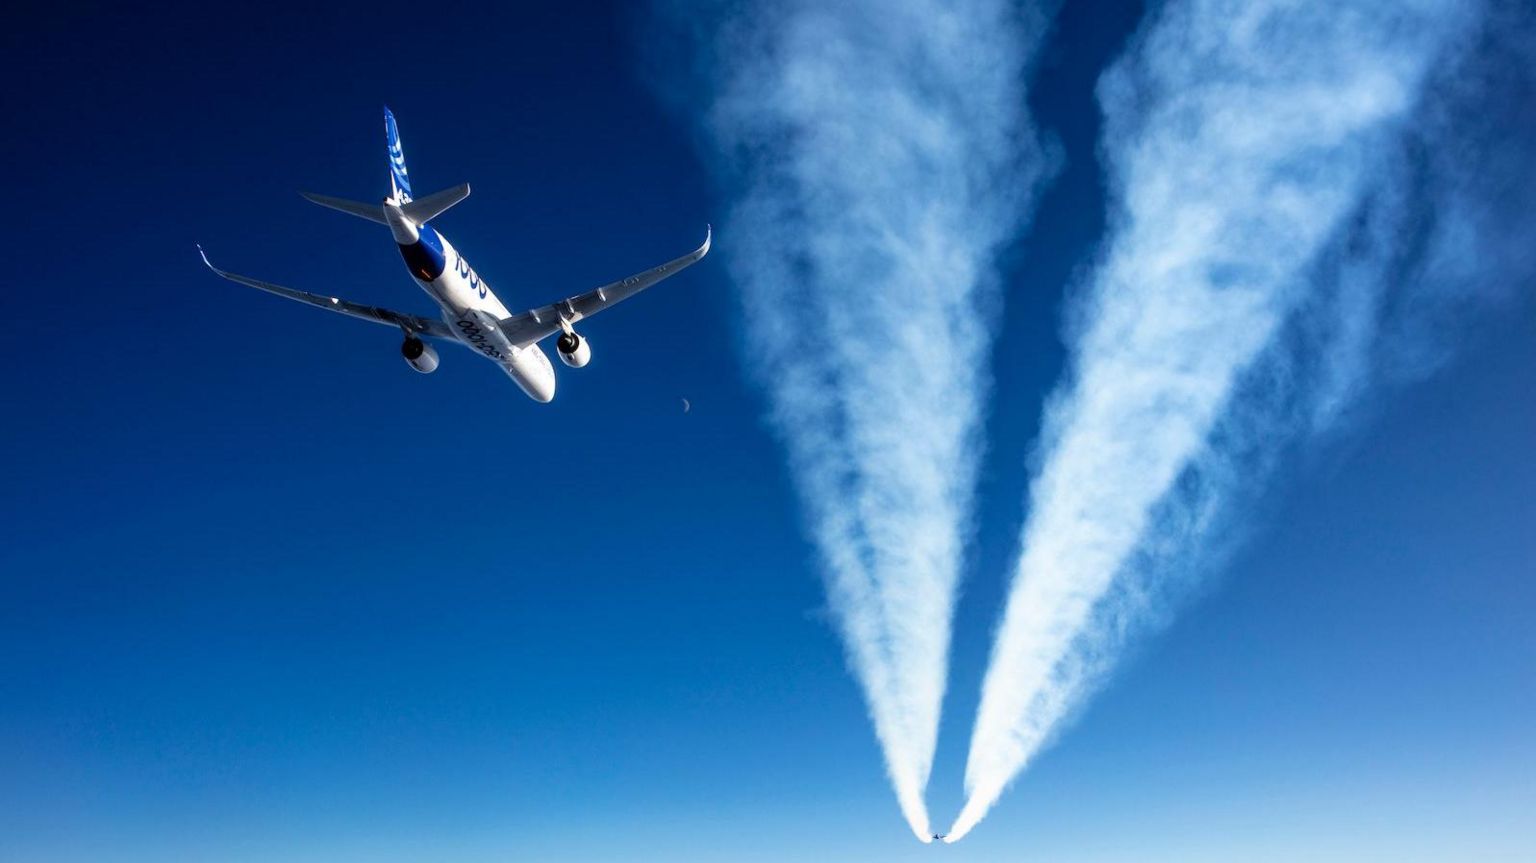 An Airbus A350 flying behind the contrail of another jet in blue skies